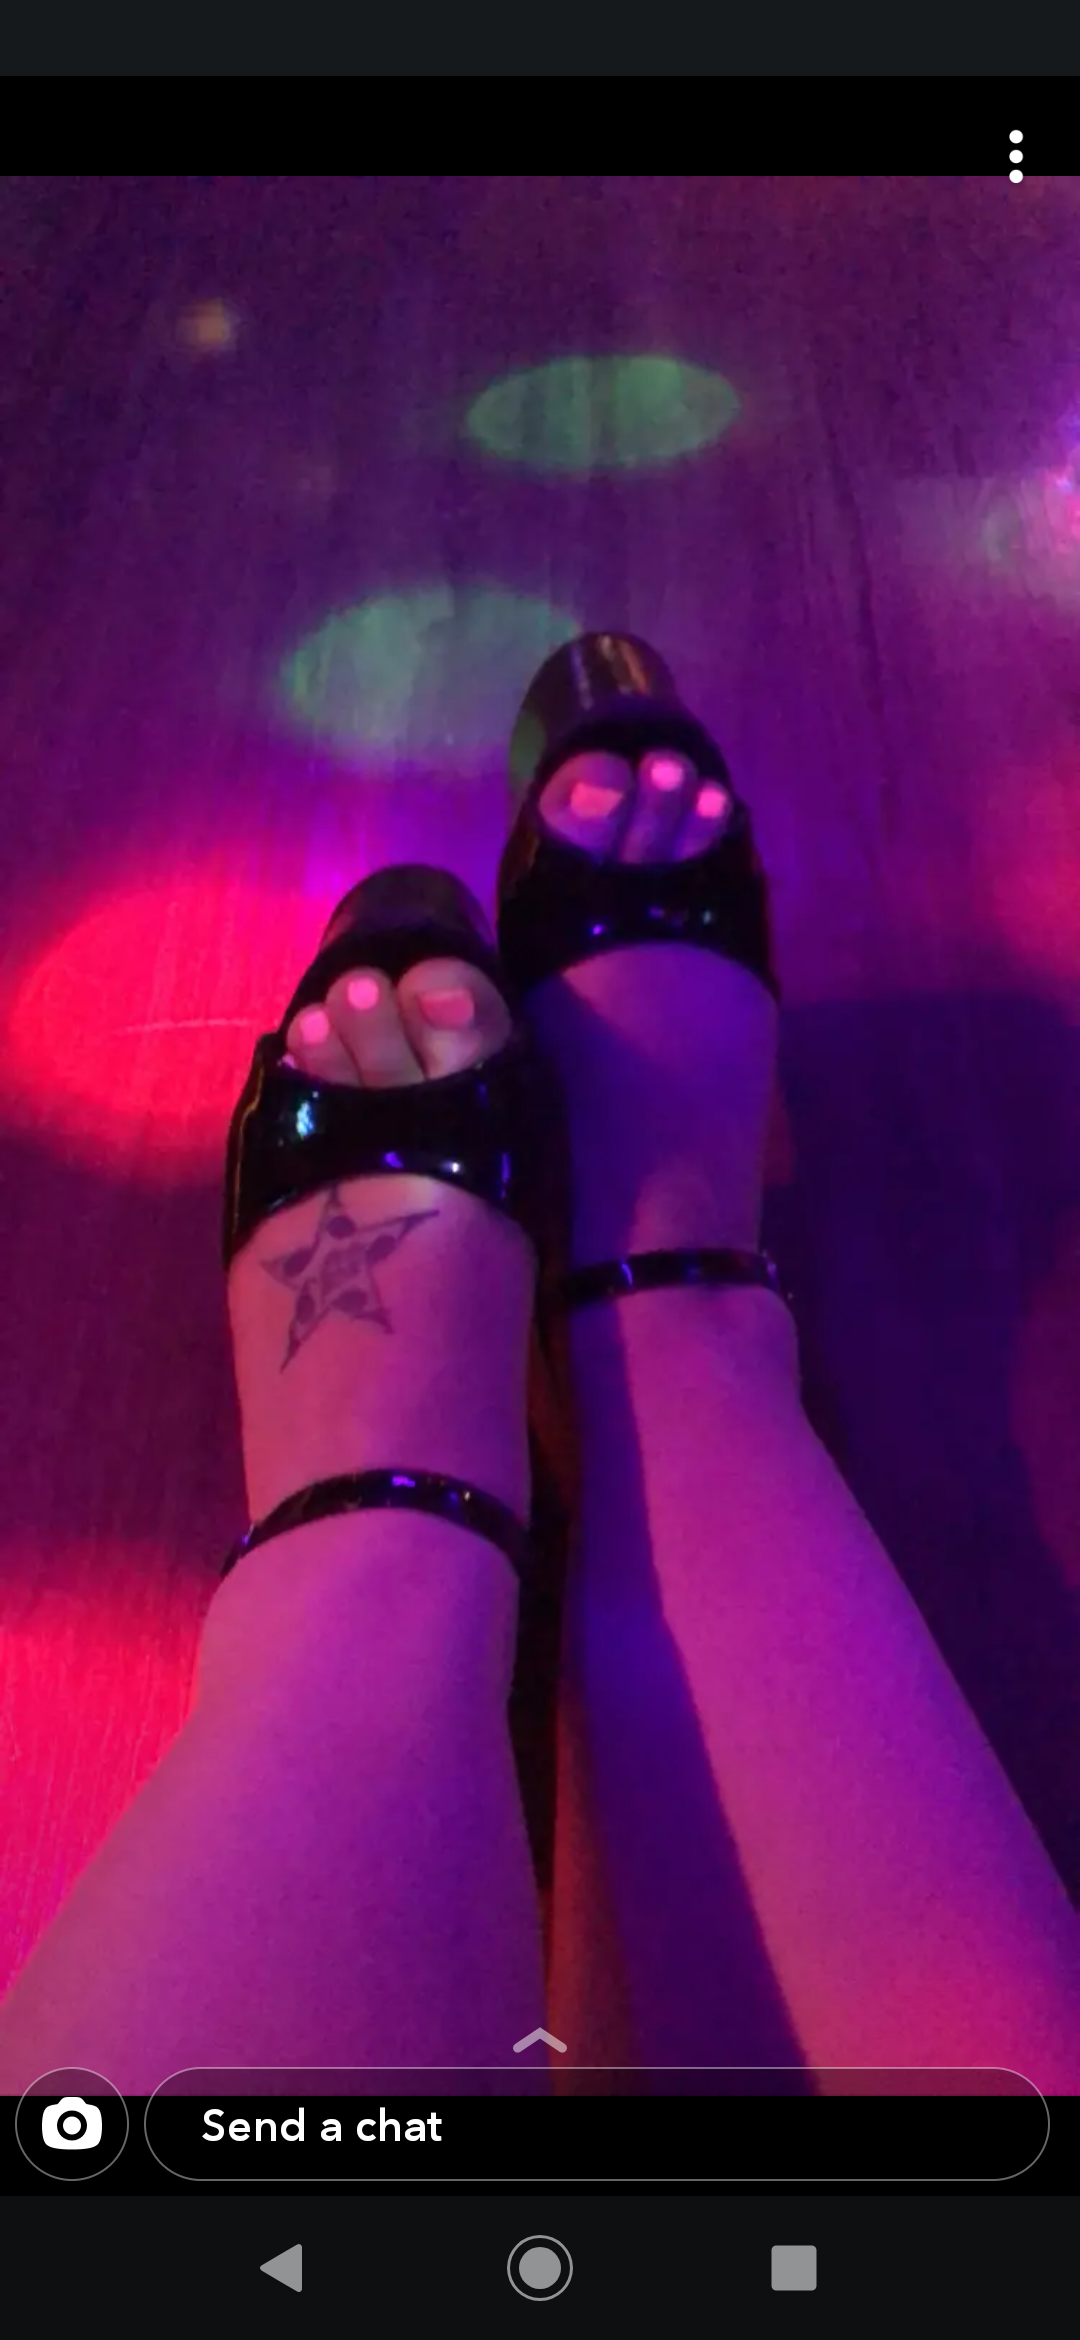 Watch the Photo by Stellarae68 with the username @Stellarae68, posted on March 21, 2020. The post is about the topic Sexy Feet. and the text says 'Stella Rae's feet at work'